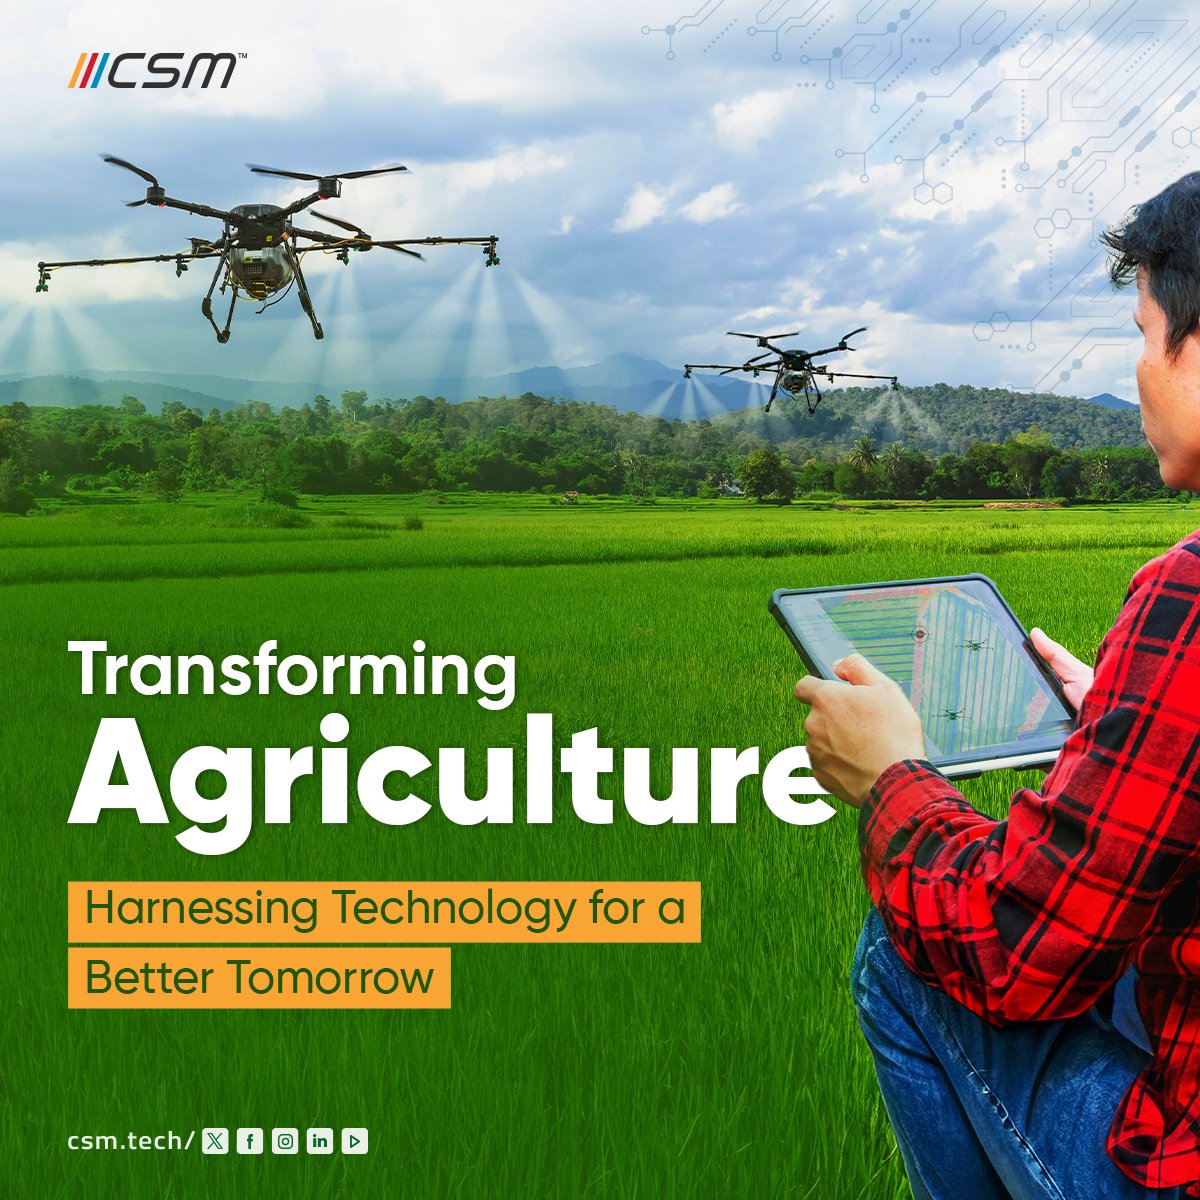 CSM Tech's Innovation in Sustainable Agriculture. 

Discover how we're revolutionizing agriculture with cutting-edge technology. 

👉Explore more: bit.ly/41OzHRT    

#CSMTech #Agrigate #SustainableFarming #FutureFarming #SmartAgriculture